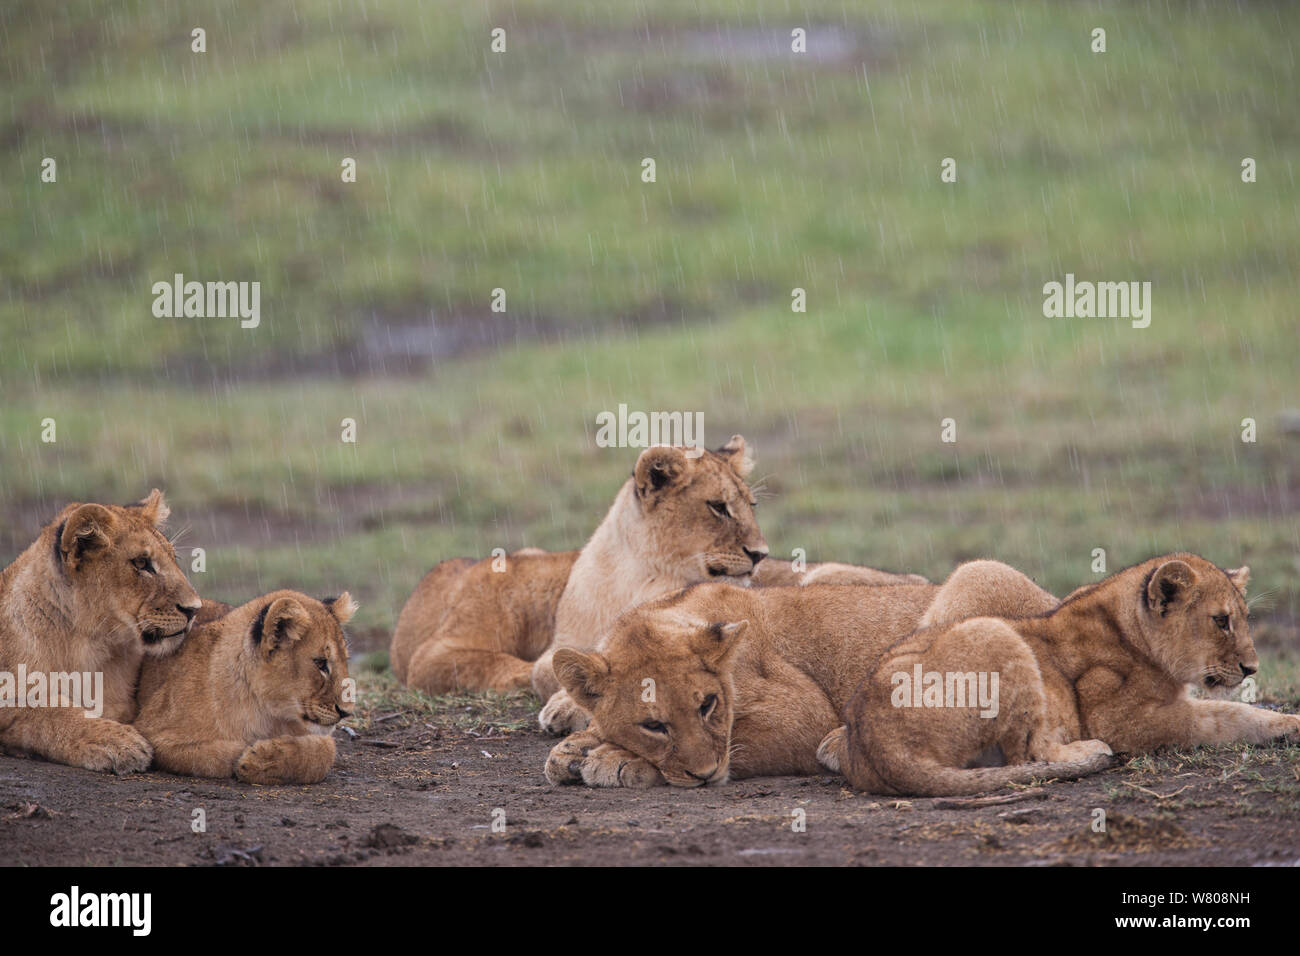 Lionesses (Panthera leo) and cubs in the rain, Ngorongoro Conservation Area, Tanzania. Stock Photo